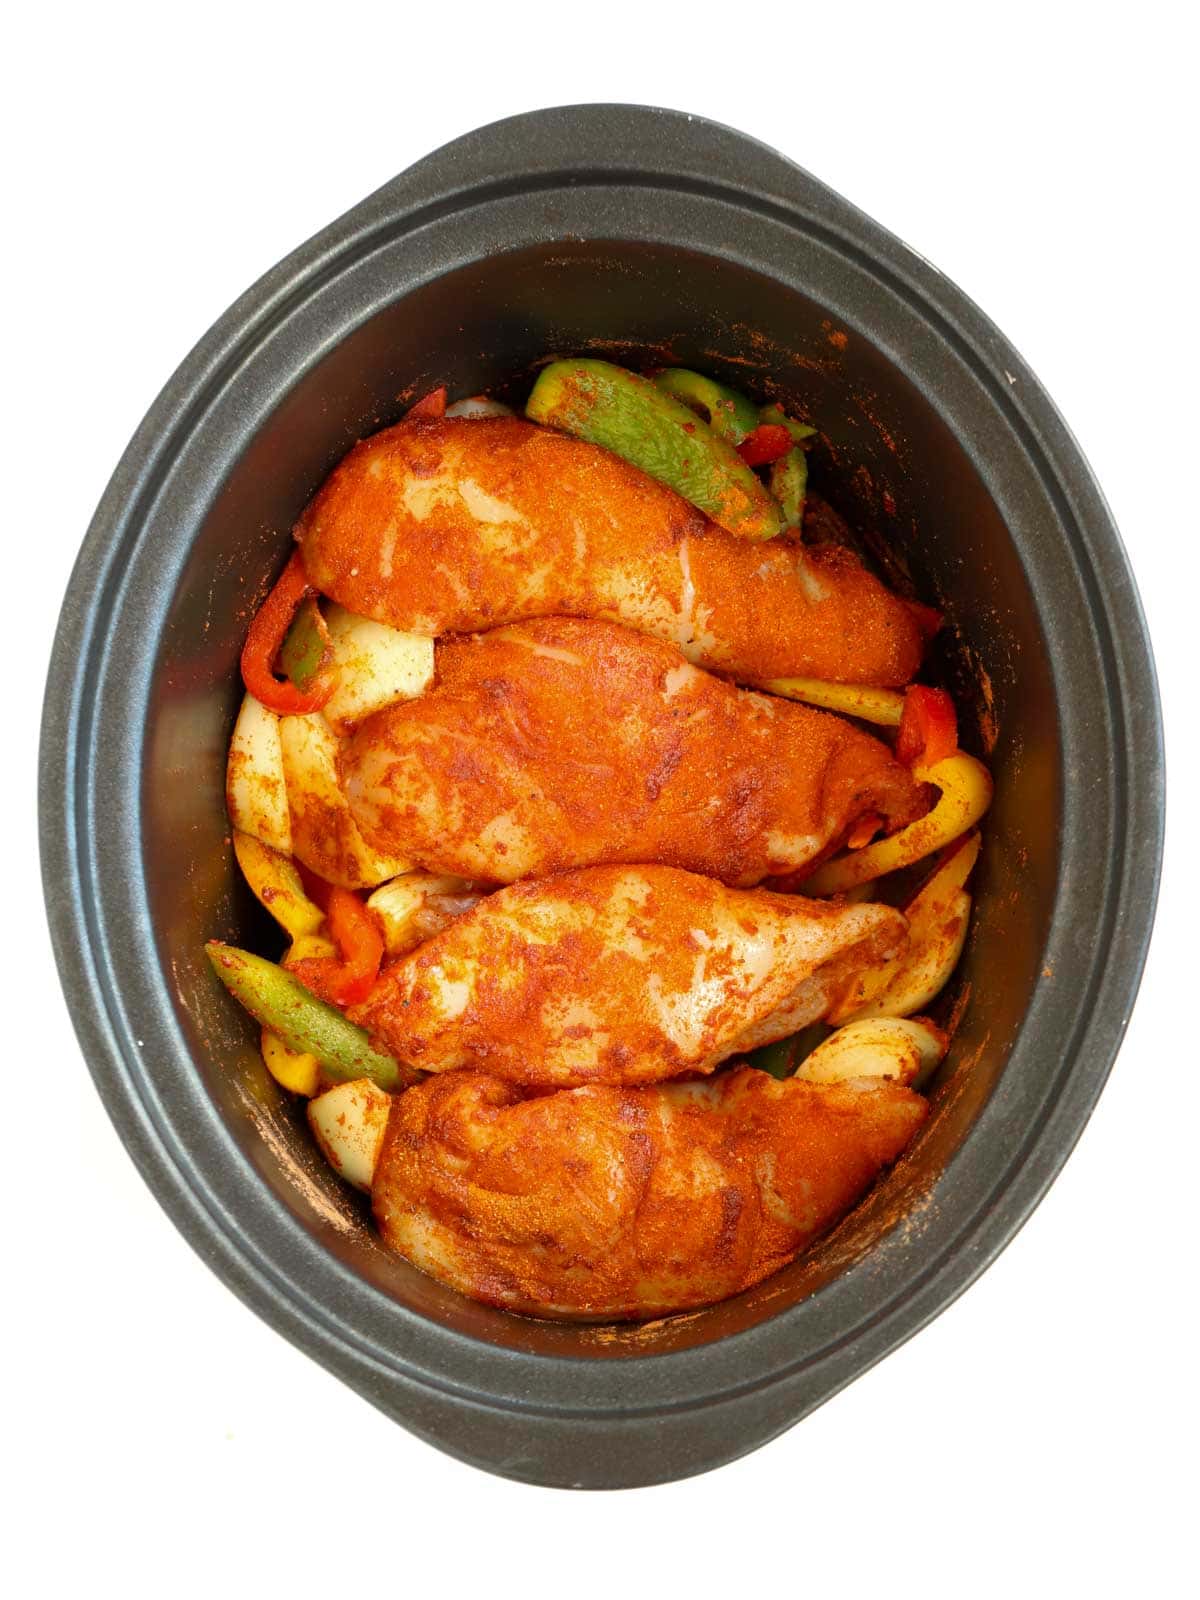 Recipe guide for making chicken fajitas in the slow cooker